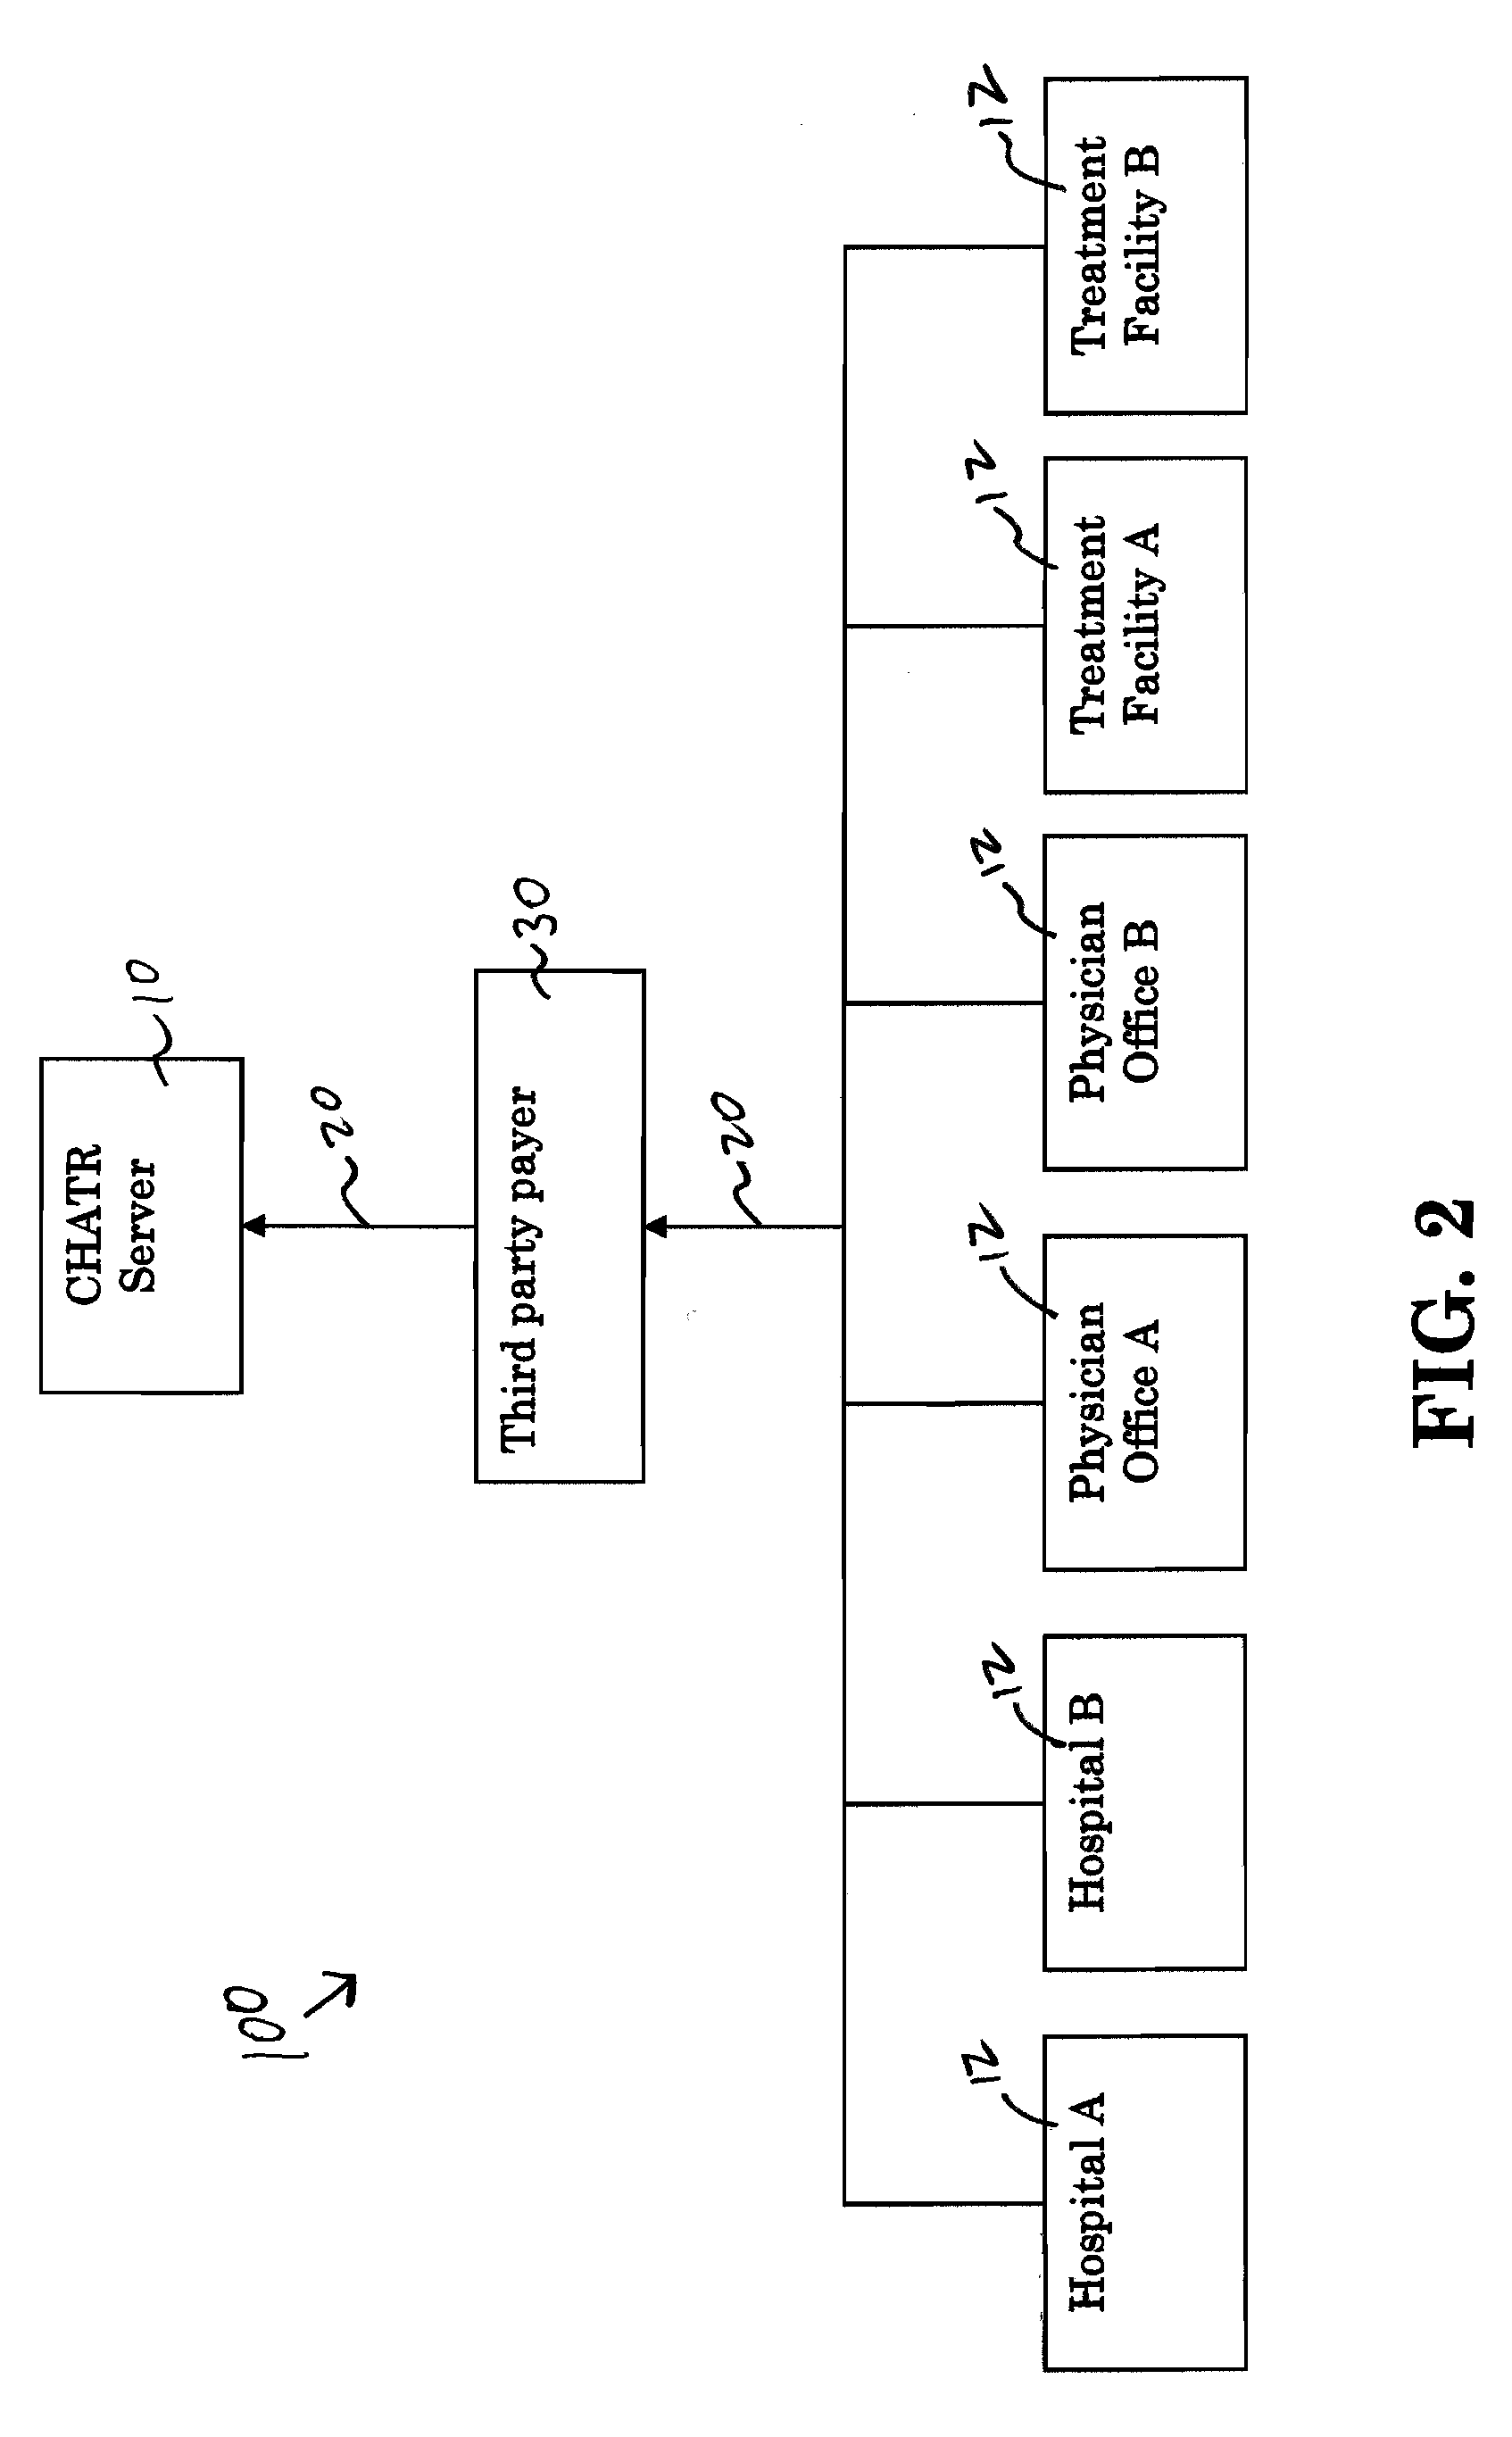 Healthcare information accessibility and processing system